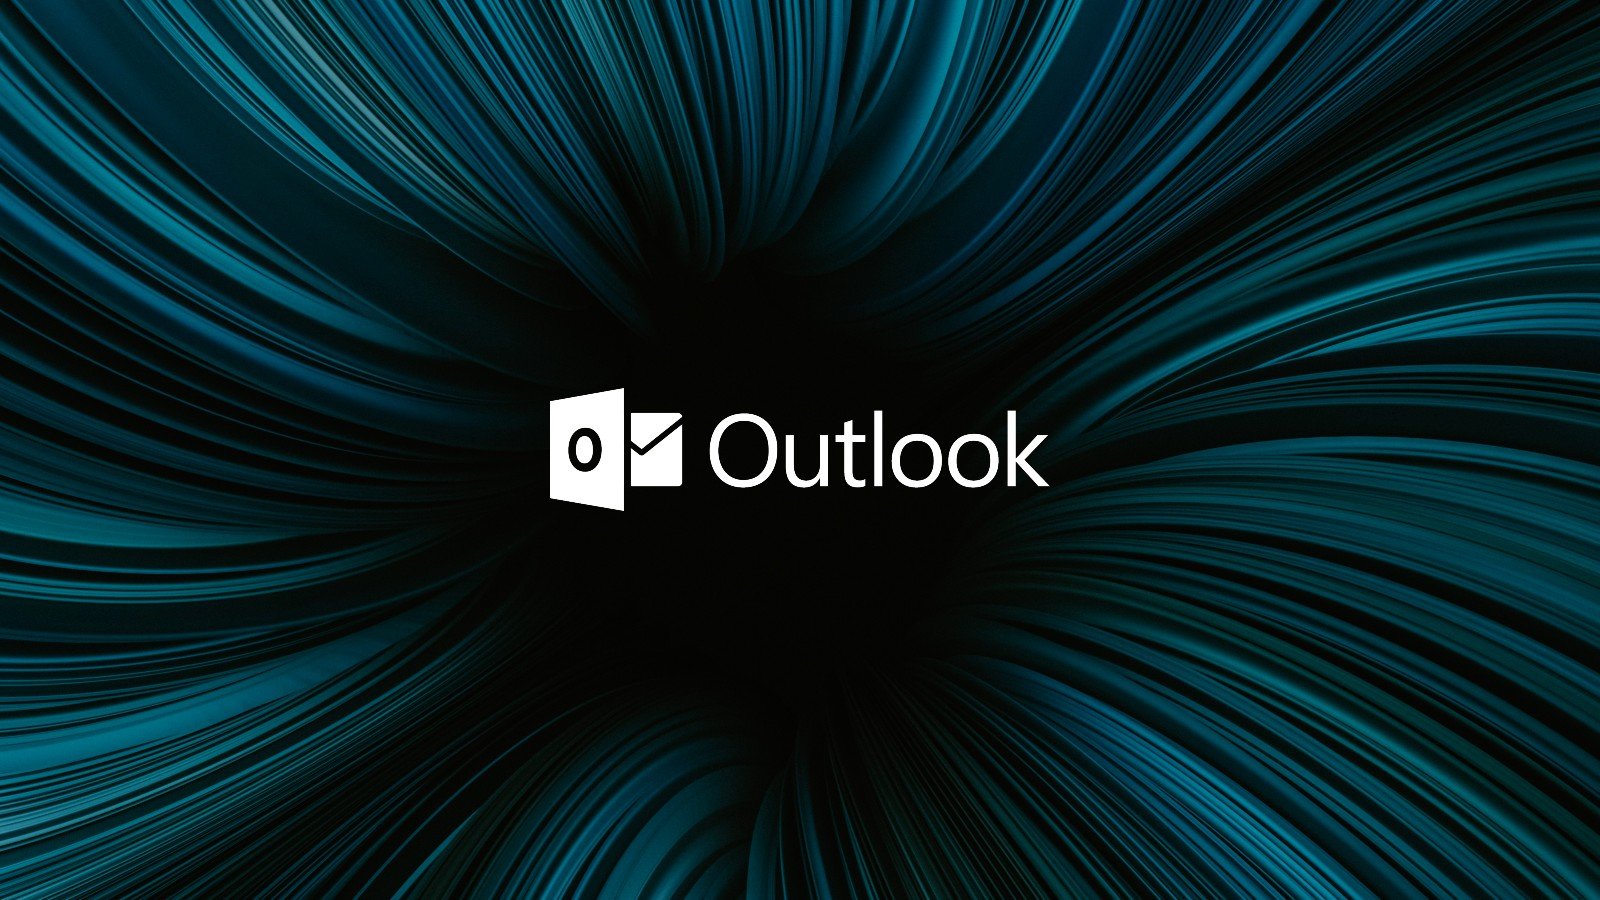 Security researchers have shared technical details for exploiting a critical Microsoft Outlook vulnerability for Windows (CVE-2023-23397) that al